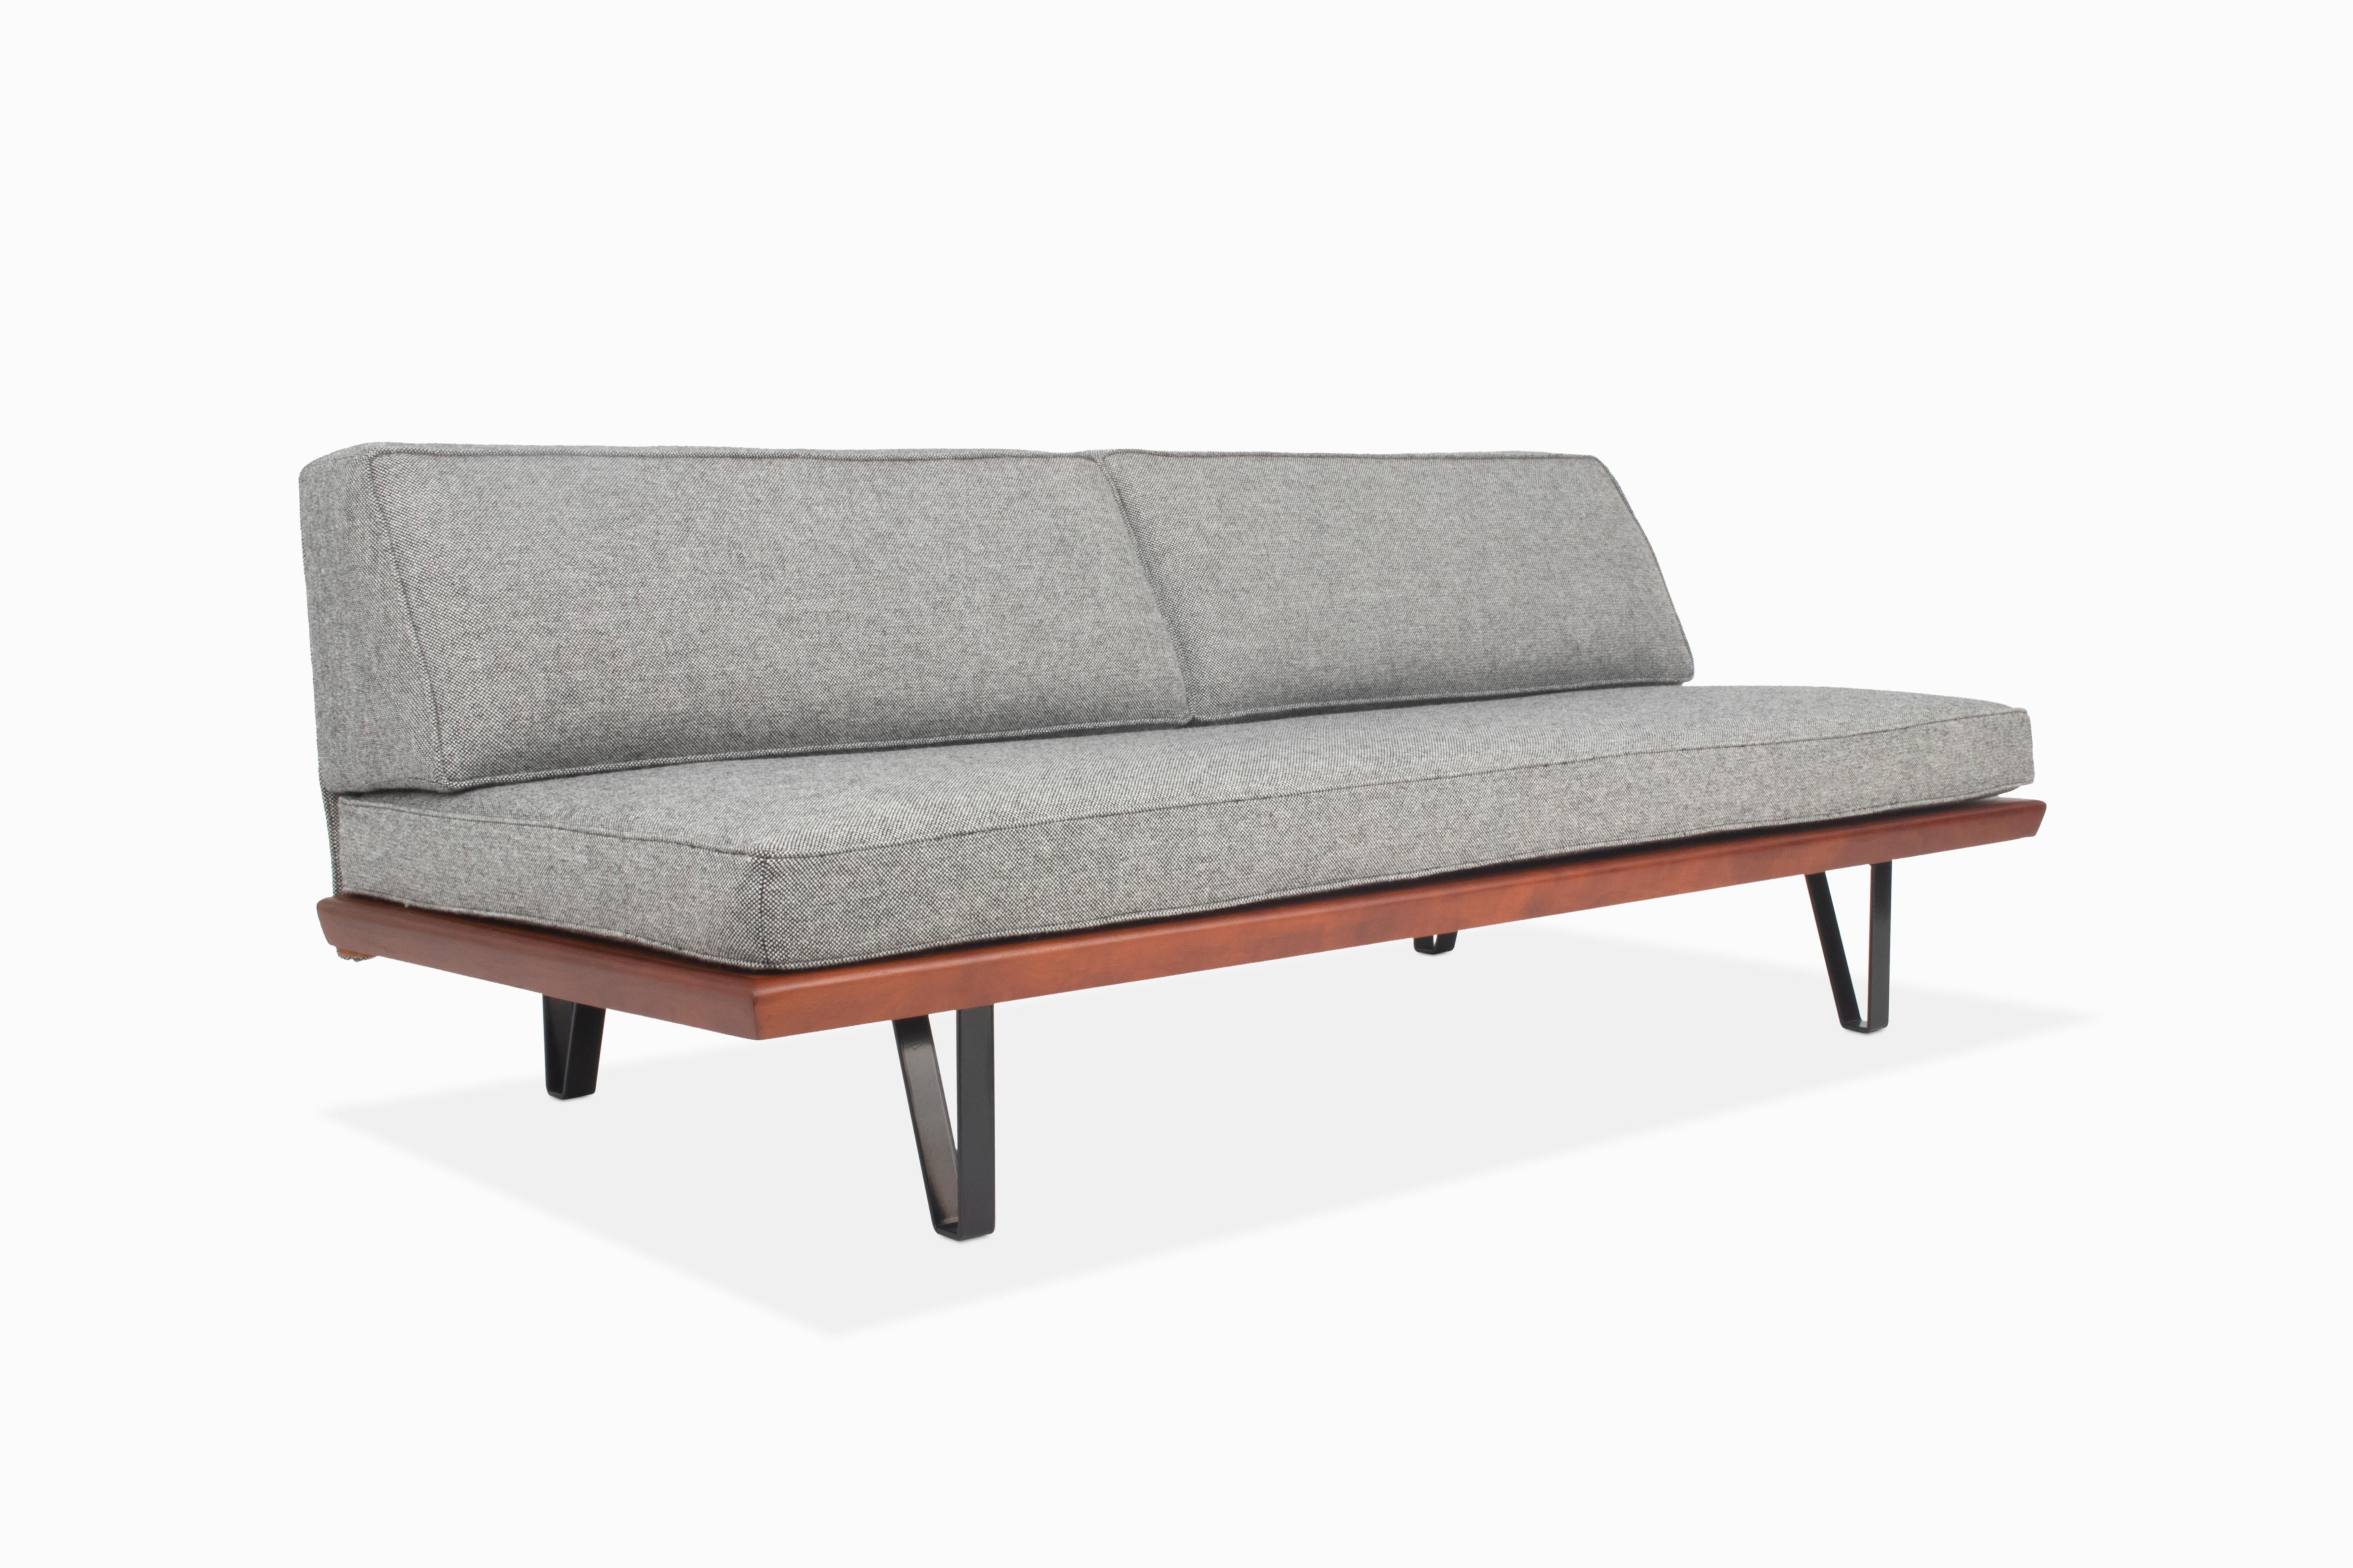 Here is a beautiful expanding daybed by Mel Bogart for Felmore Associates. This sofa has been fully restored - freshly powder-coated iron base, refinished walnut frame and reupholstered in wool Hallingdal fabric by Kvadrat. The clever pull-out